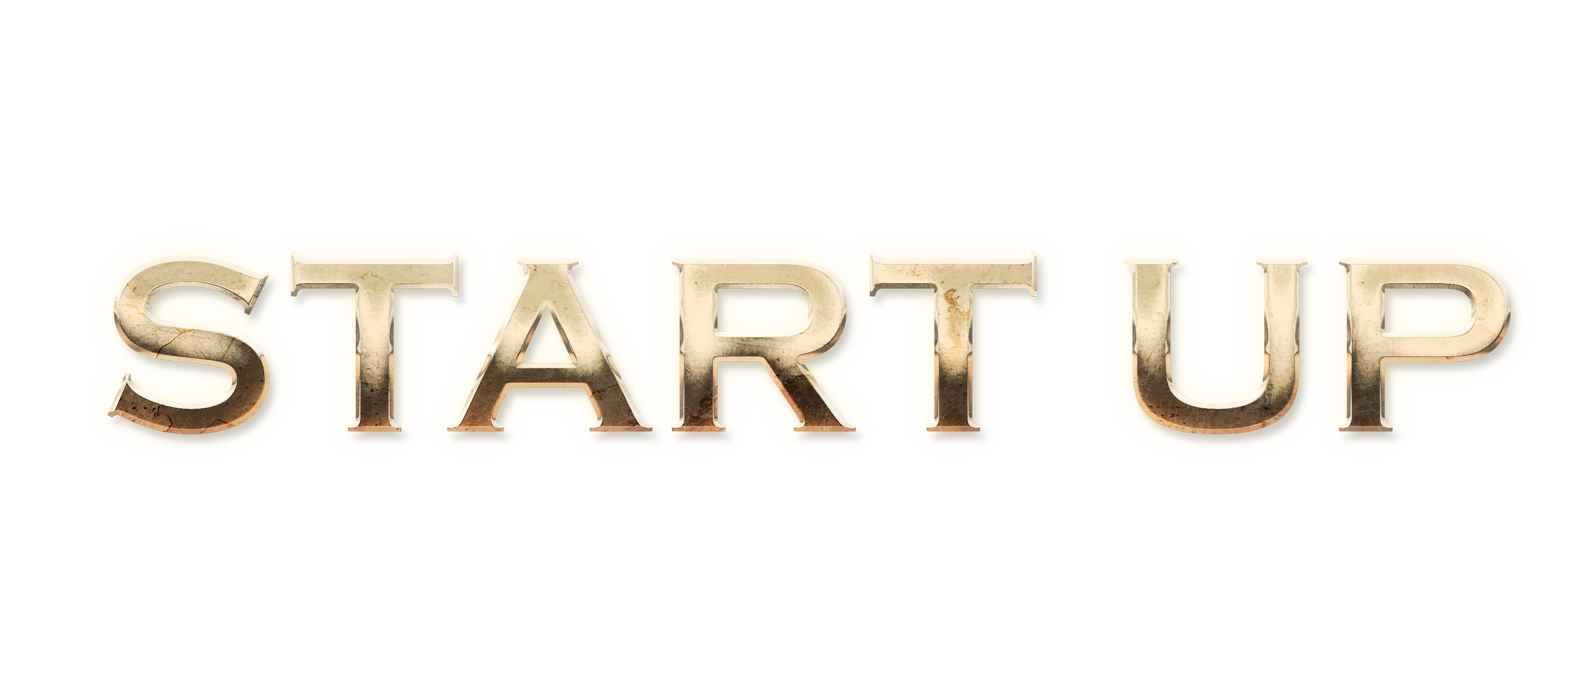 WORD START UP gold text effects art typography PNG images free